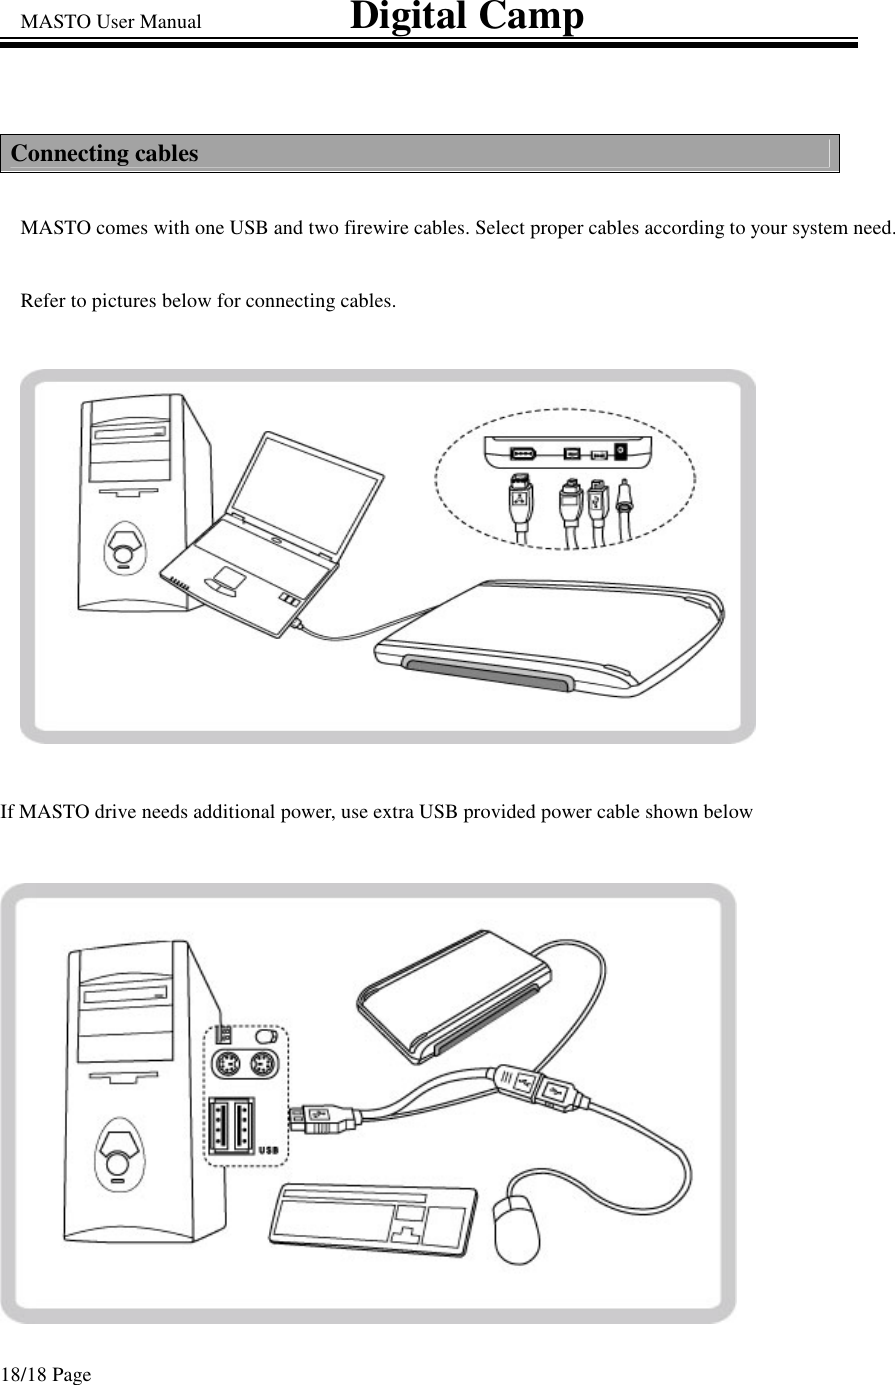 MASTO User Manual                             Digital Camp 18/18 Page Connecting cables MASTO comes with one USB and two firewire cables. Select proper cables according to your system need.  Refer to pictures below for connecting cables.    If MASTO drive needs additional power, use extra USB provided power cable shown below  